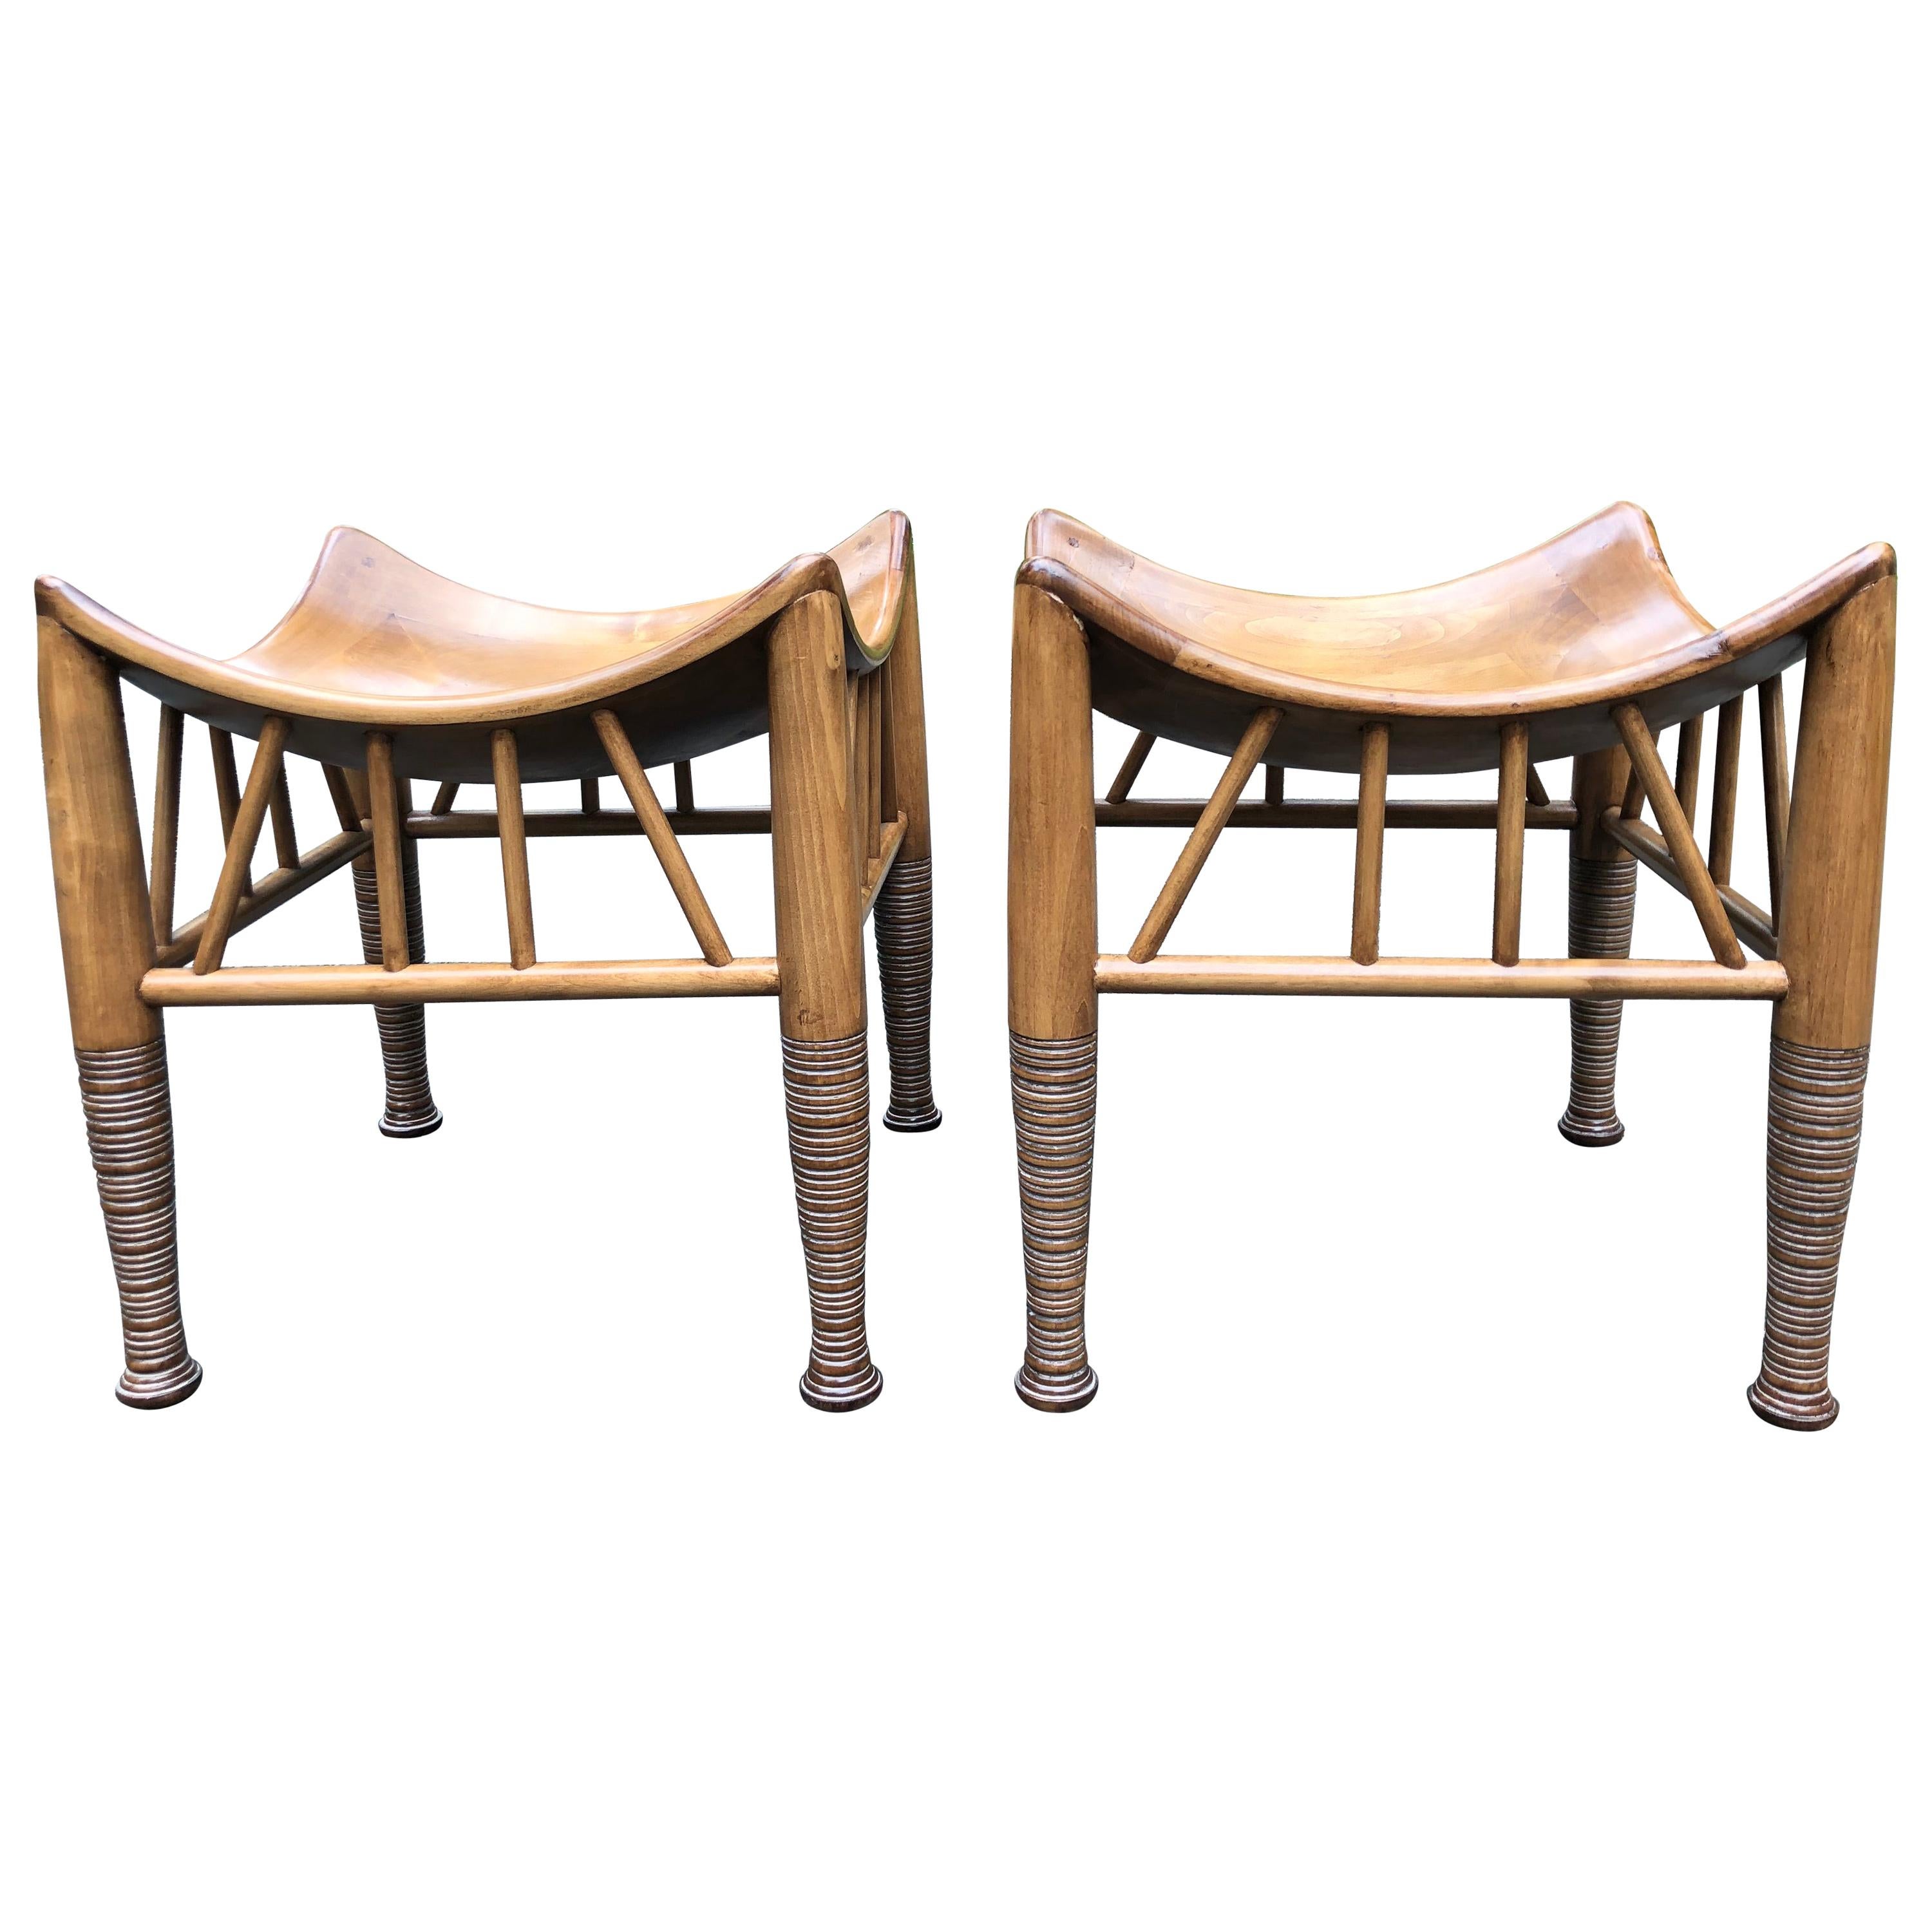 Super Cool Pair of Liberty of London Style Wooden Thebes Stools